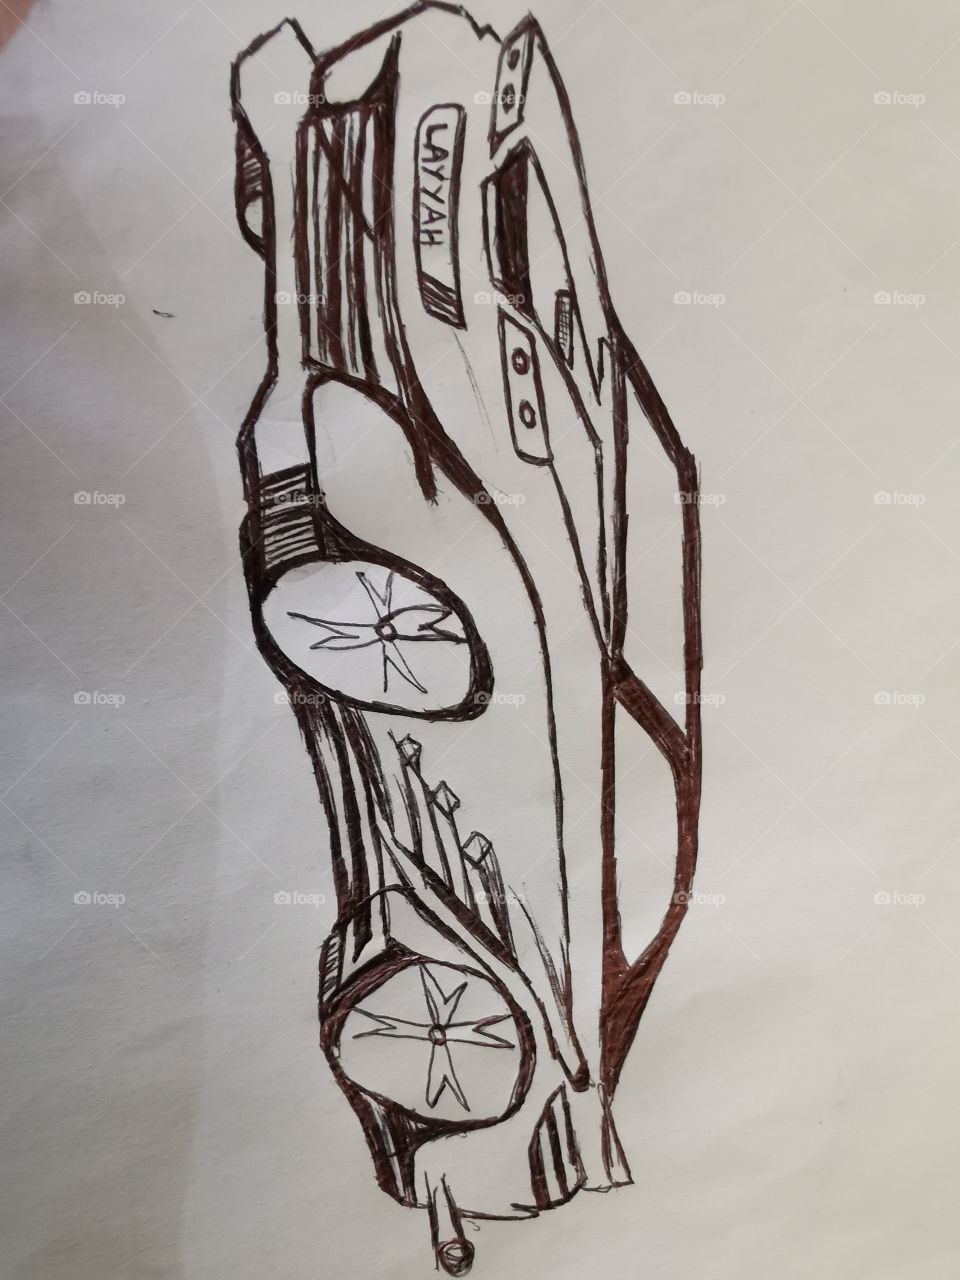 Concept car...what would you name it? I drew it myself? Watch this space.. More to come!!!